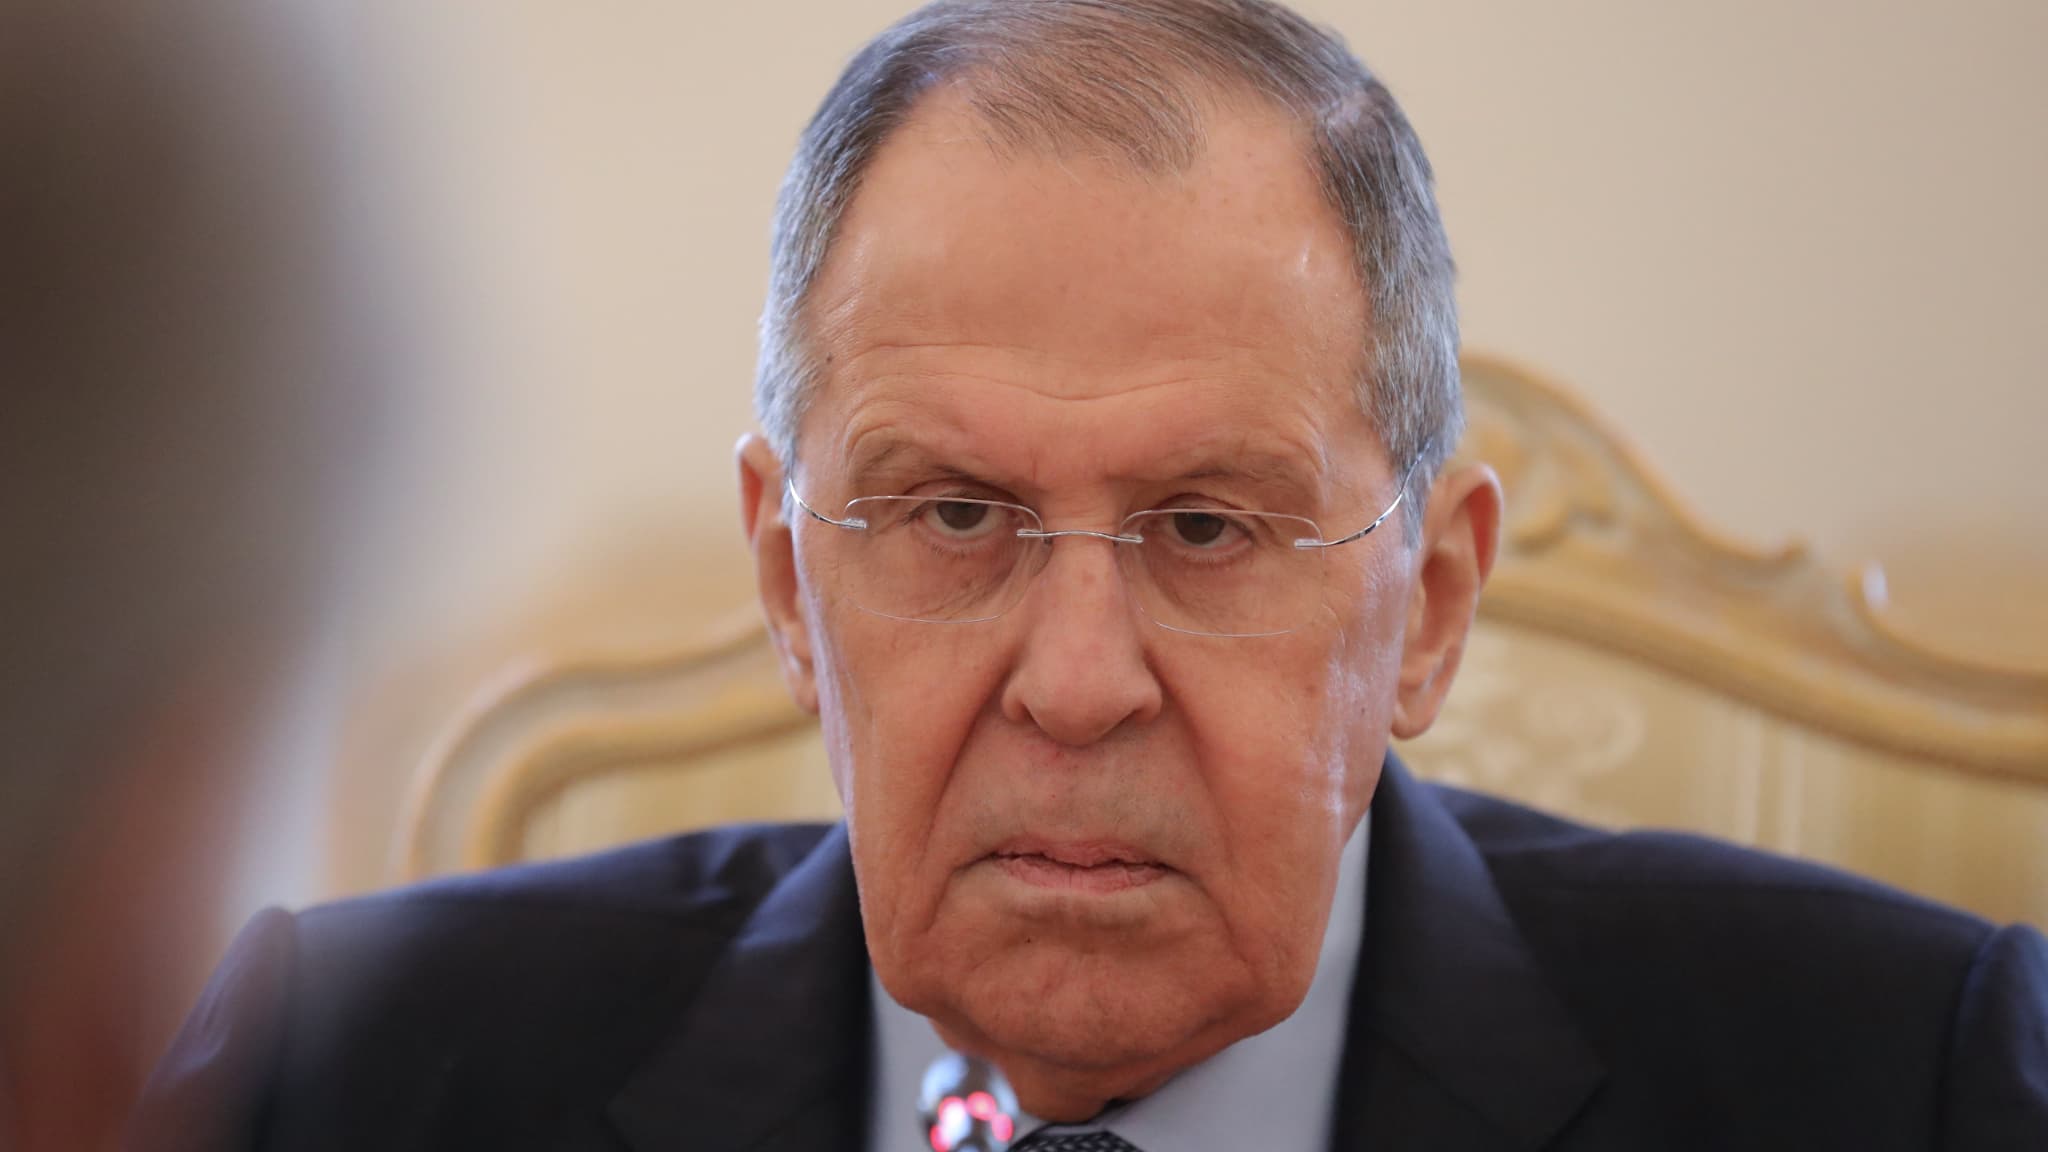 LIVE – War in Ukraine: Lavrov walks out of G20 meeting during German diplomatic chief’s speech